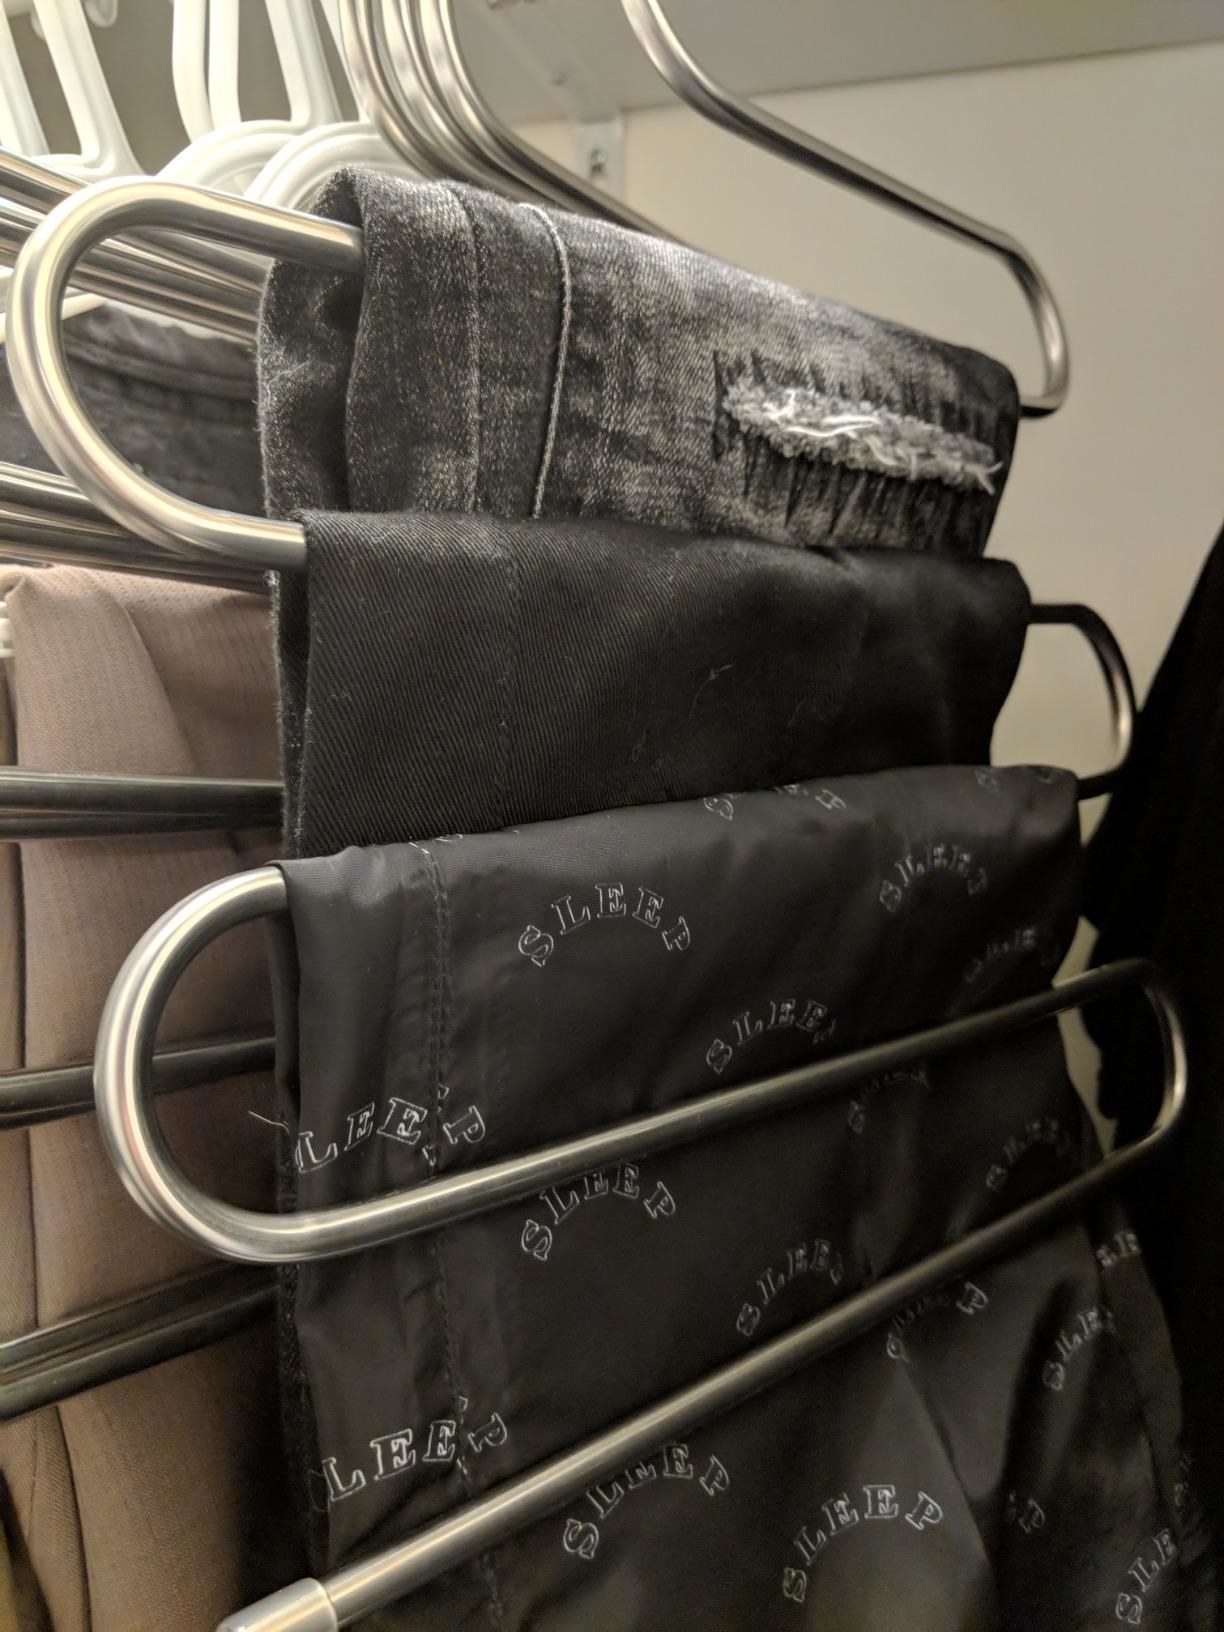 Reviewer image of three pairs of pants hanging from the rod